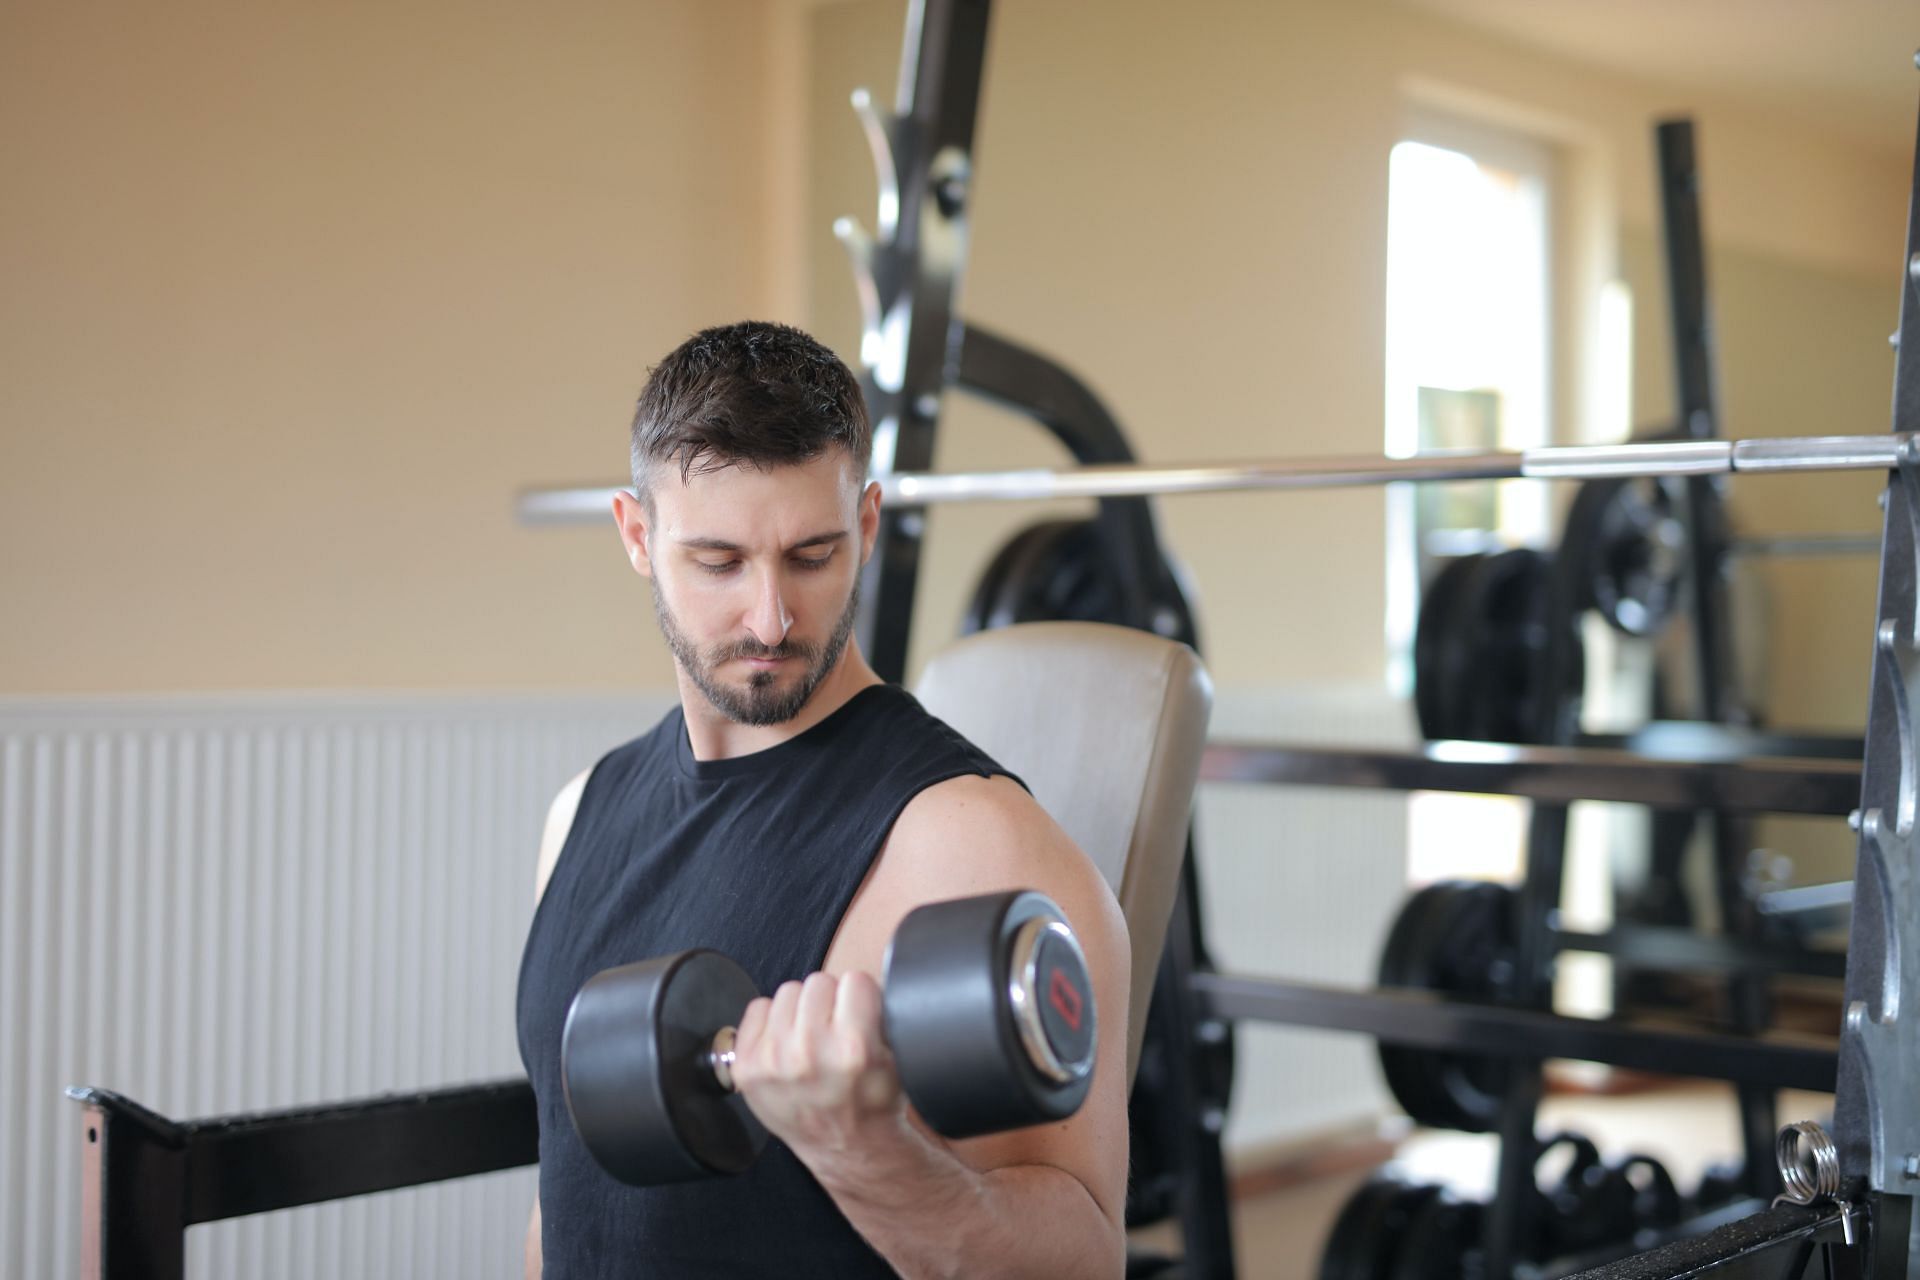 Want to strengthen your shoulders? Try these easy and effective shoulder building exercises. (Image via Pexels / Andrea Piacquadio)